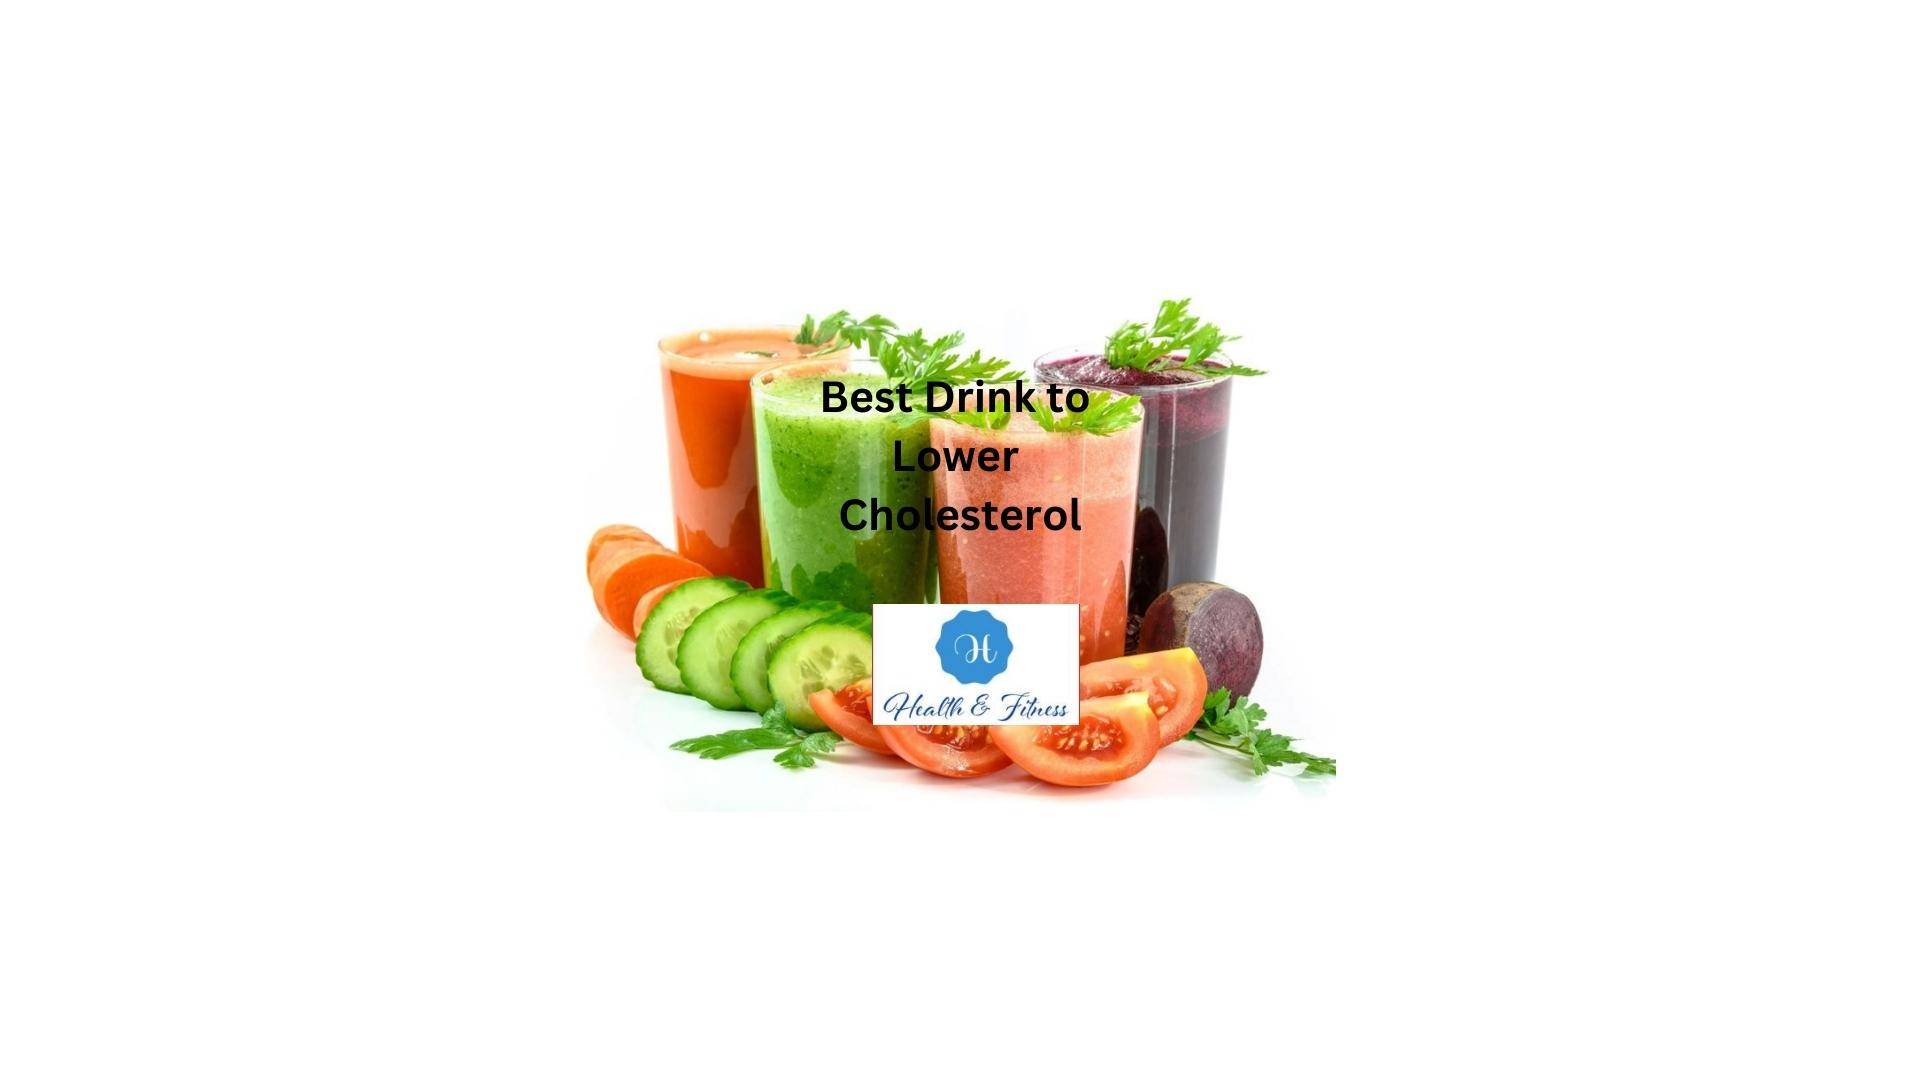 What is the best drink to lower cholesterol